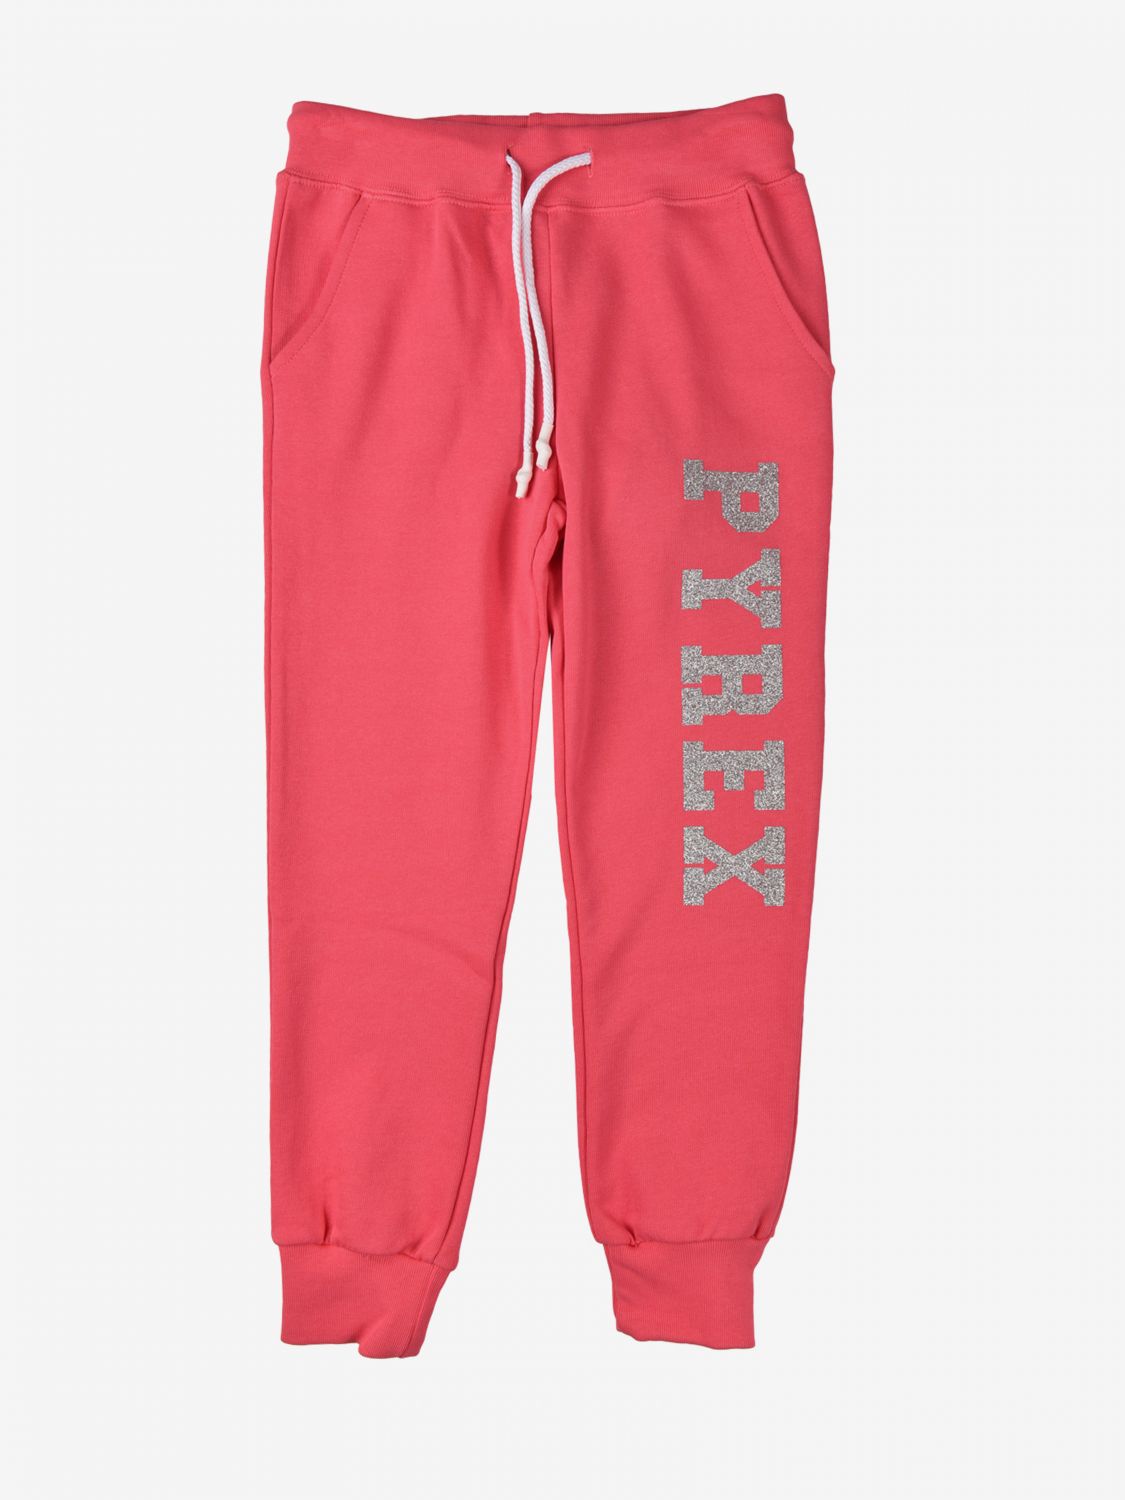 Pyrex Outlet: pants for girls - Fuchsia | Pyrex pants 019226 online on ...